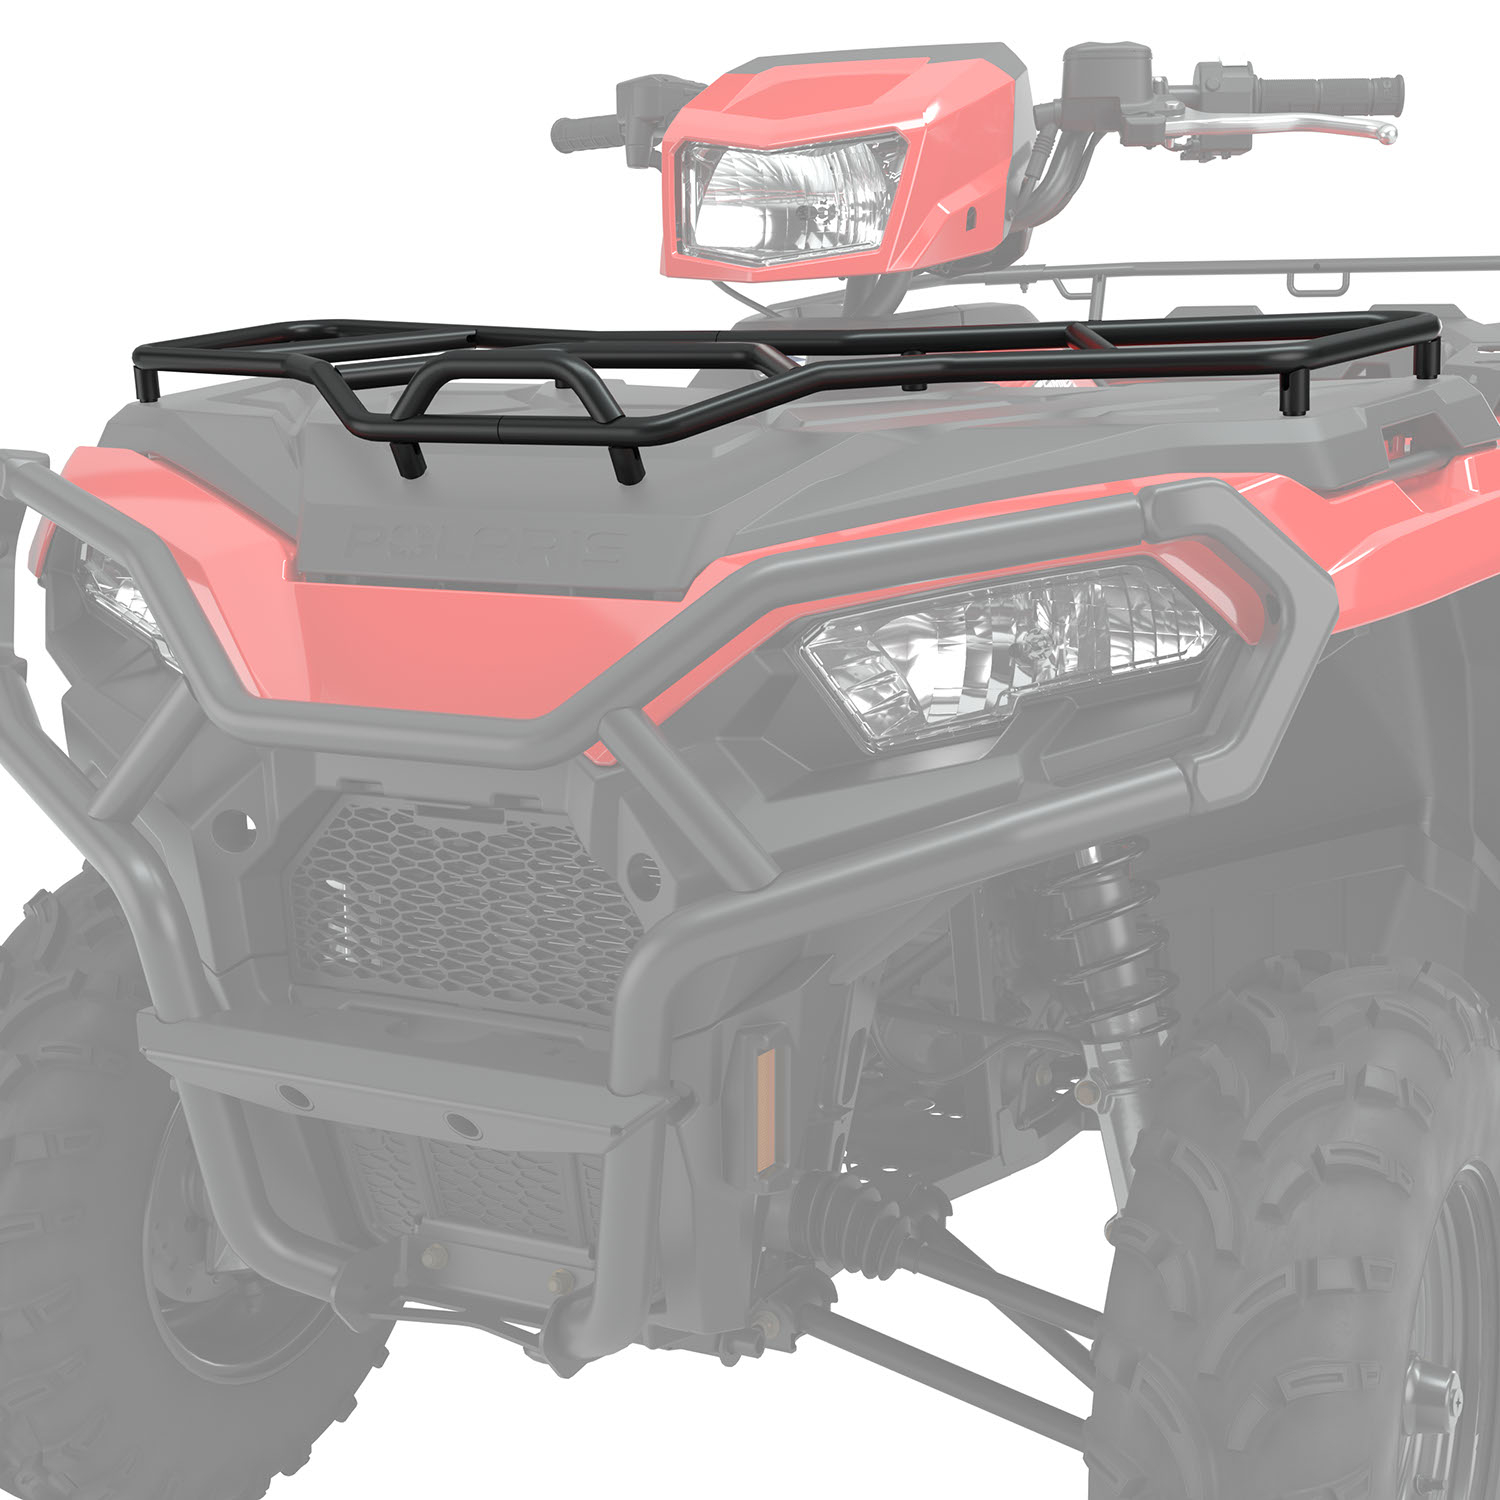 2021-2022 Accessories SAUTVS Front Steel Heavy Duty Rack Extender for Polaris Sportsman 570 450 H.O Replace #2884842 Front Rack Extender for Polaris Sportsman 570 450 